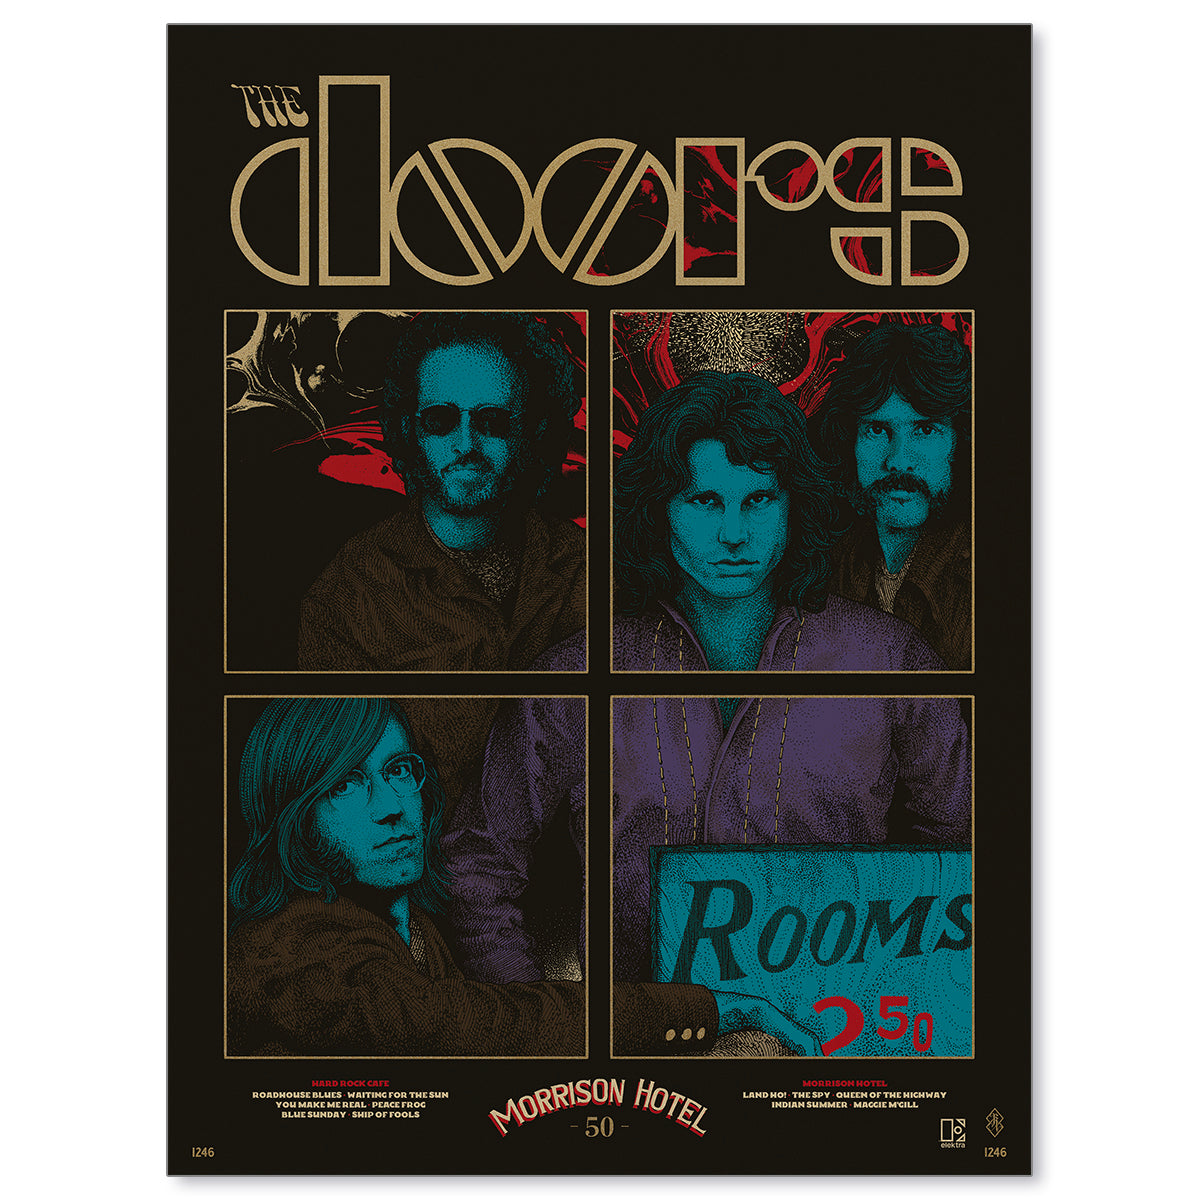 The Doors Morrison Hotel Print by Richey Beckett (Indian Summer Edition)